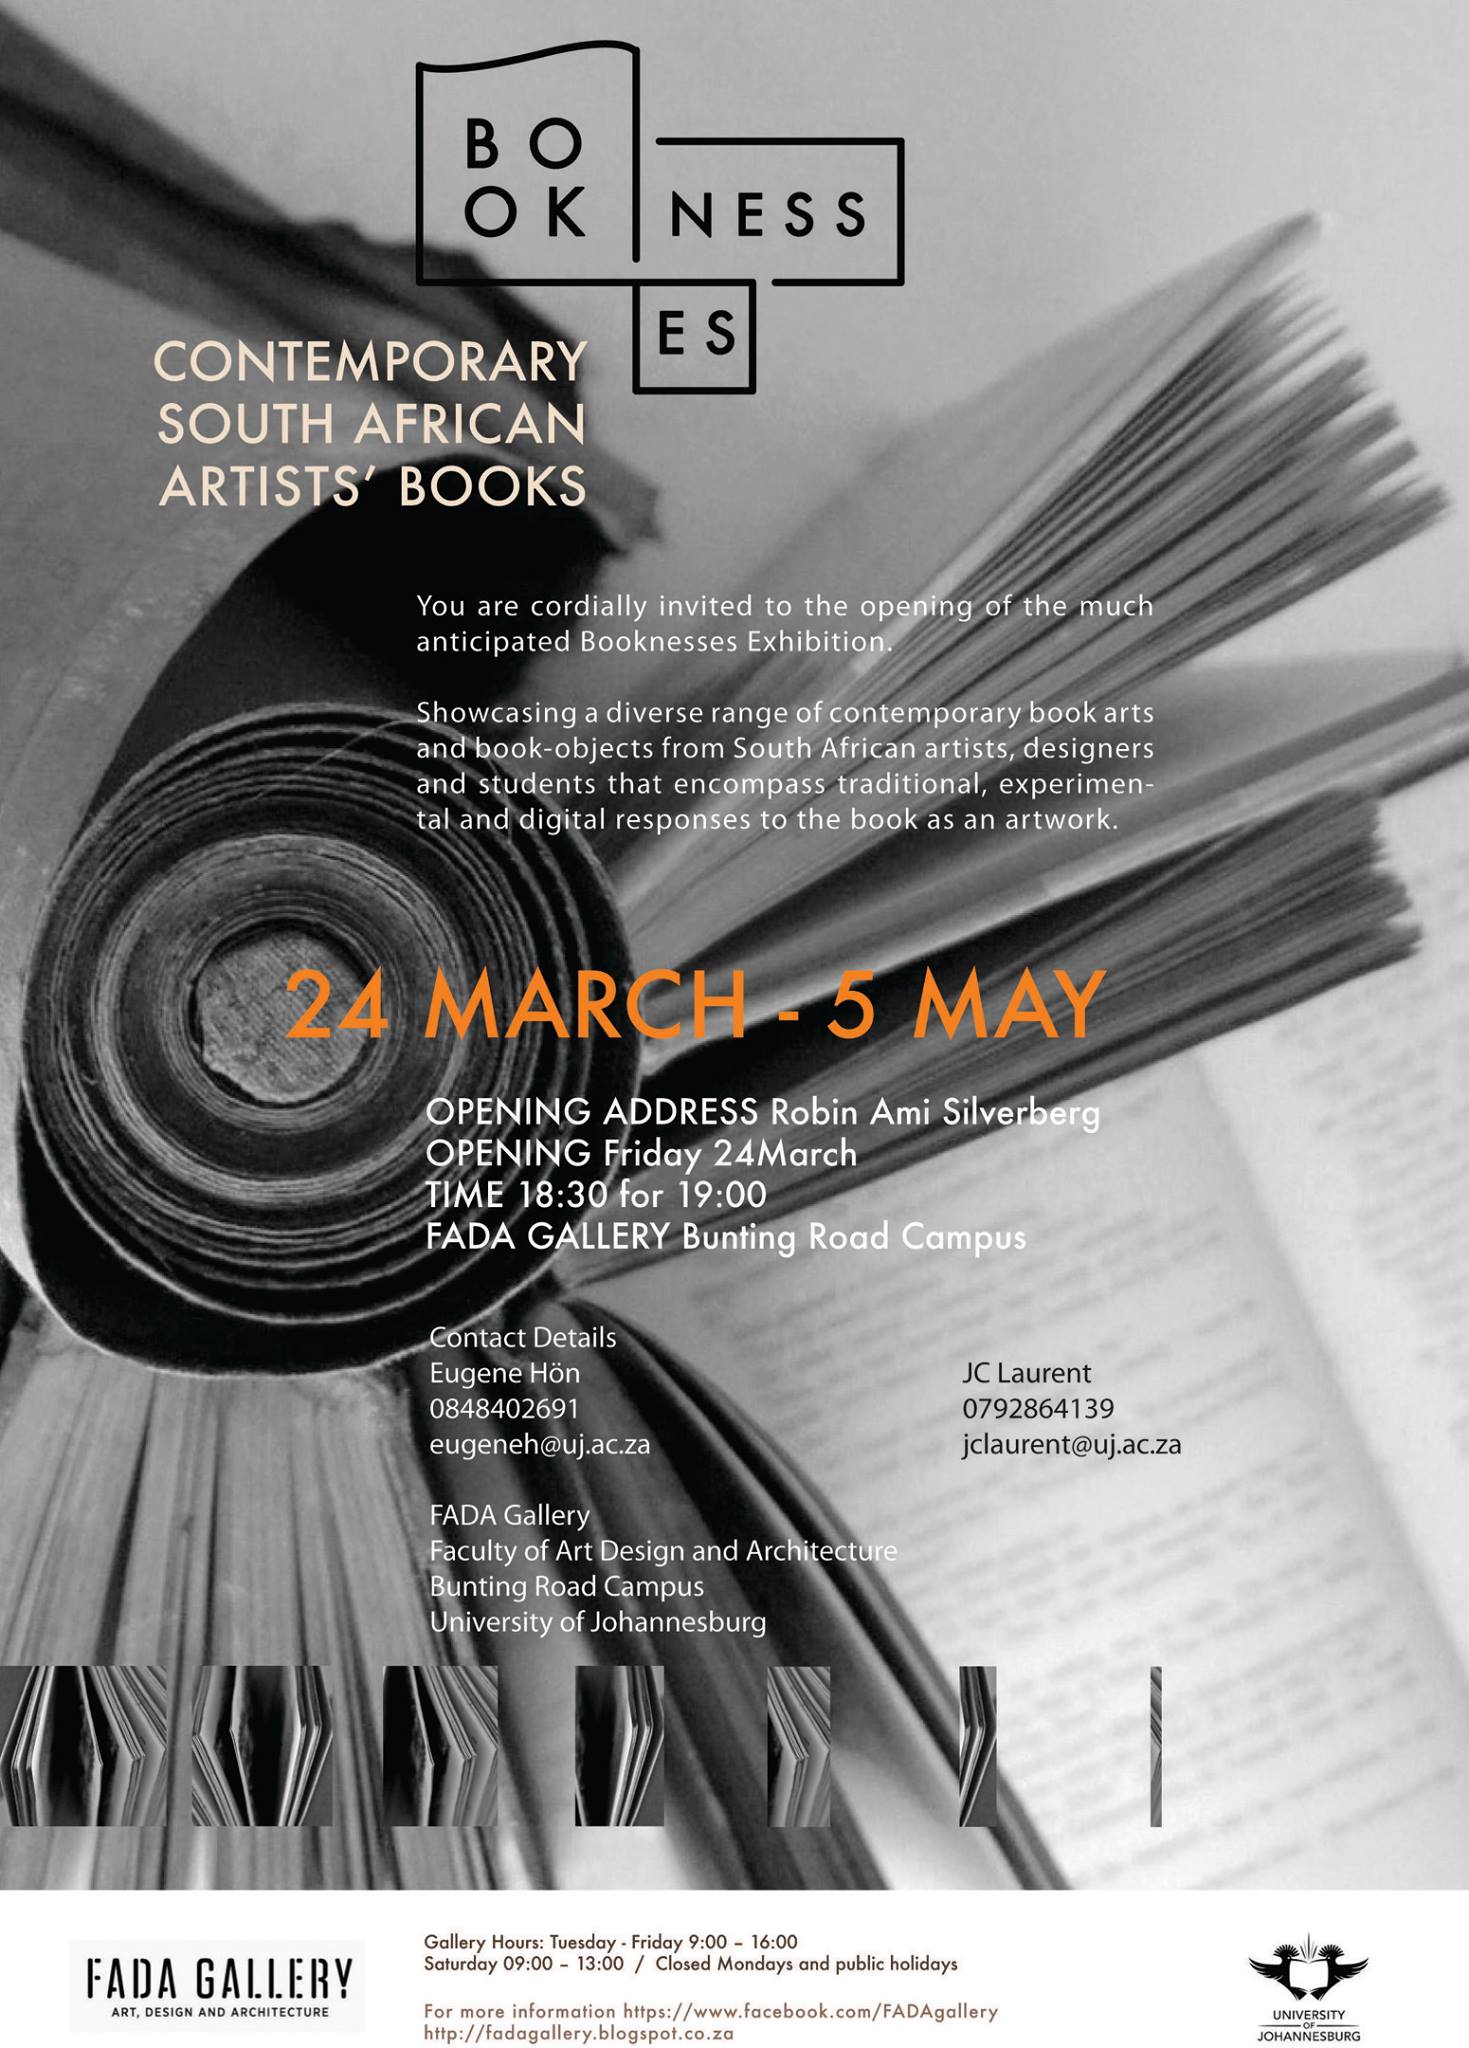 Click the image for a view of: Booknesses: Contemporary South African Artists' Books exhibition - FADA Gallery until 5 May